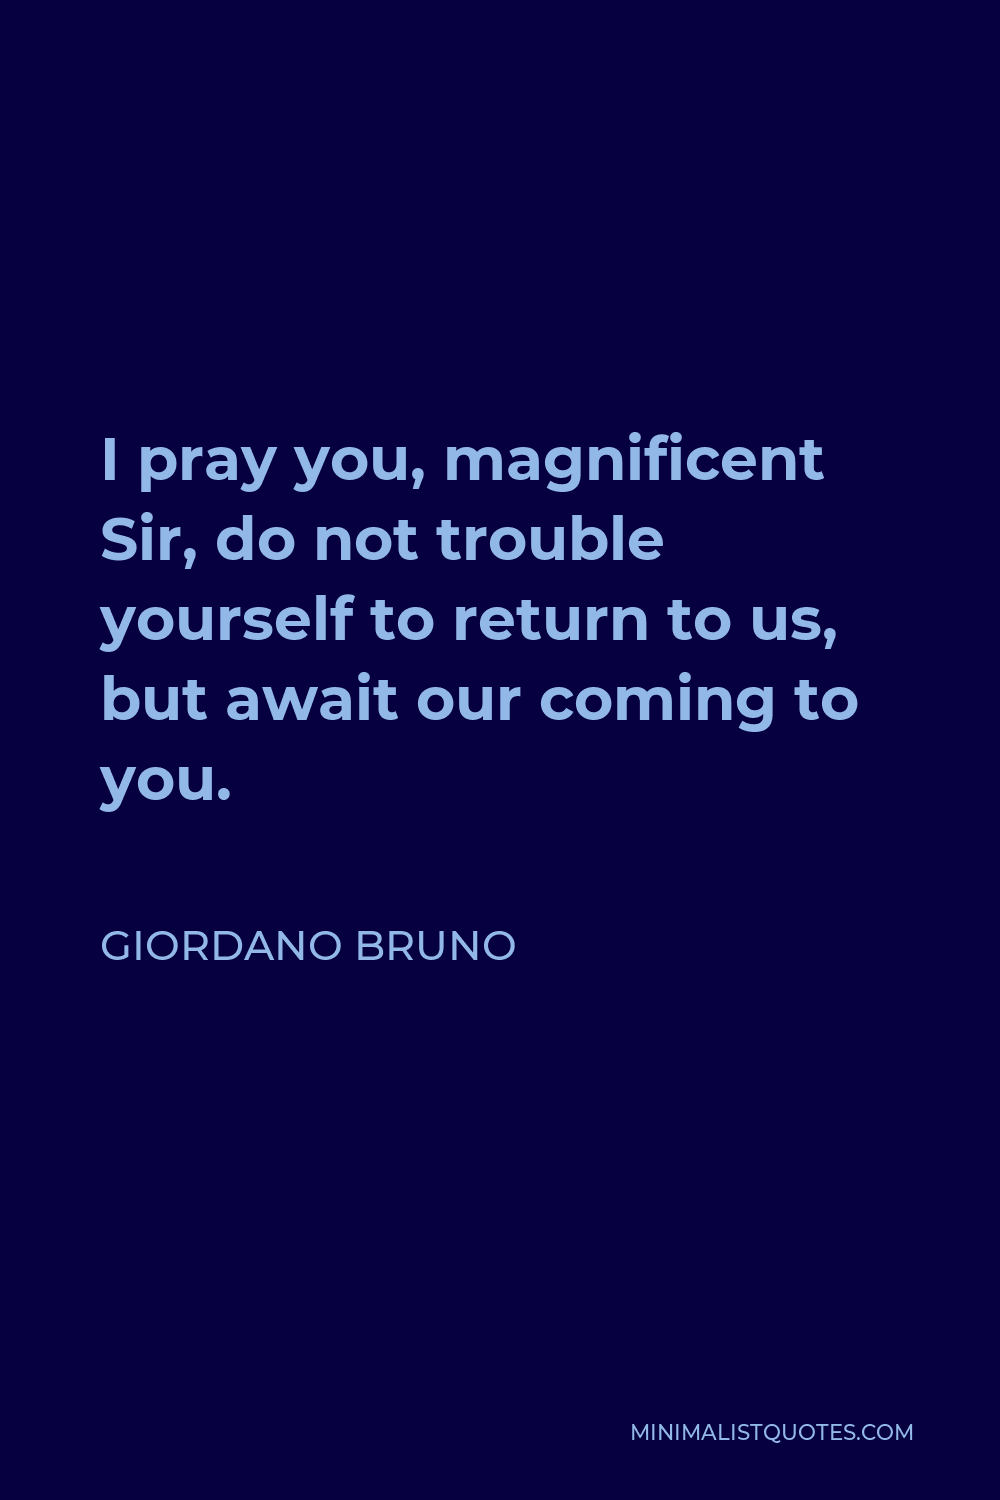 Giordano Bruno Quote - I pray you, magnificent Sir, do not trouble yourself to return to us, but await our coming to you.